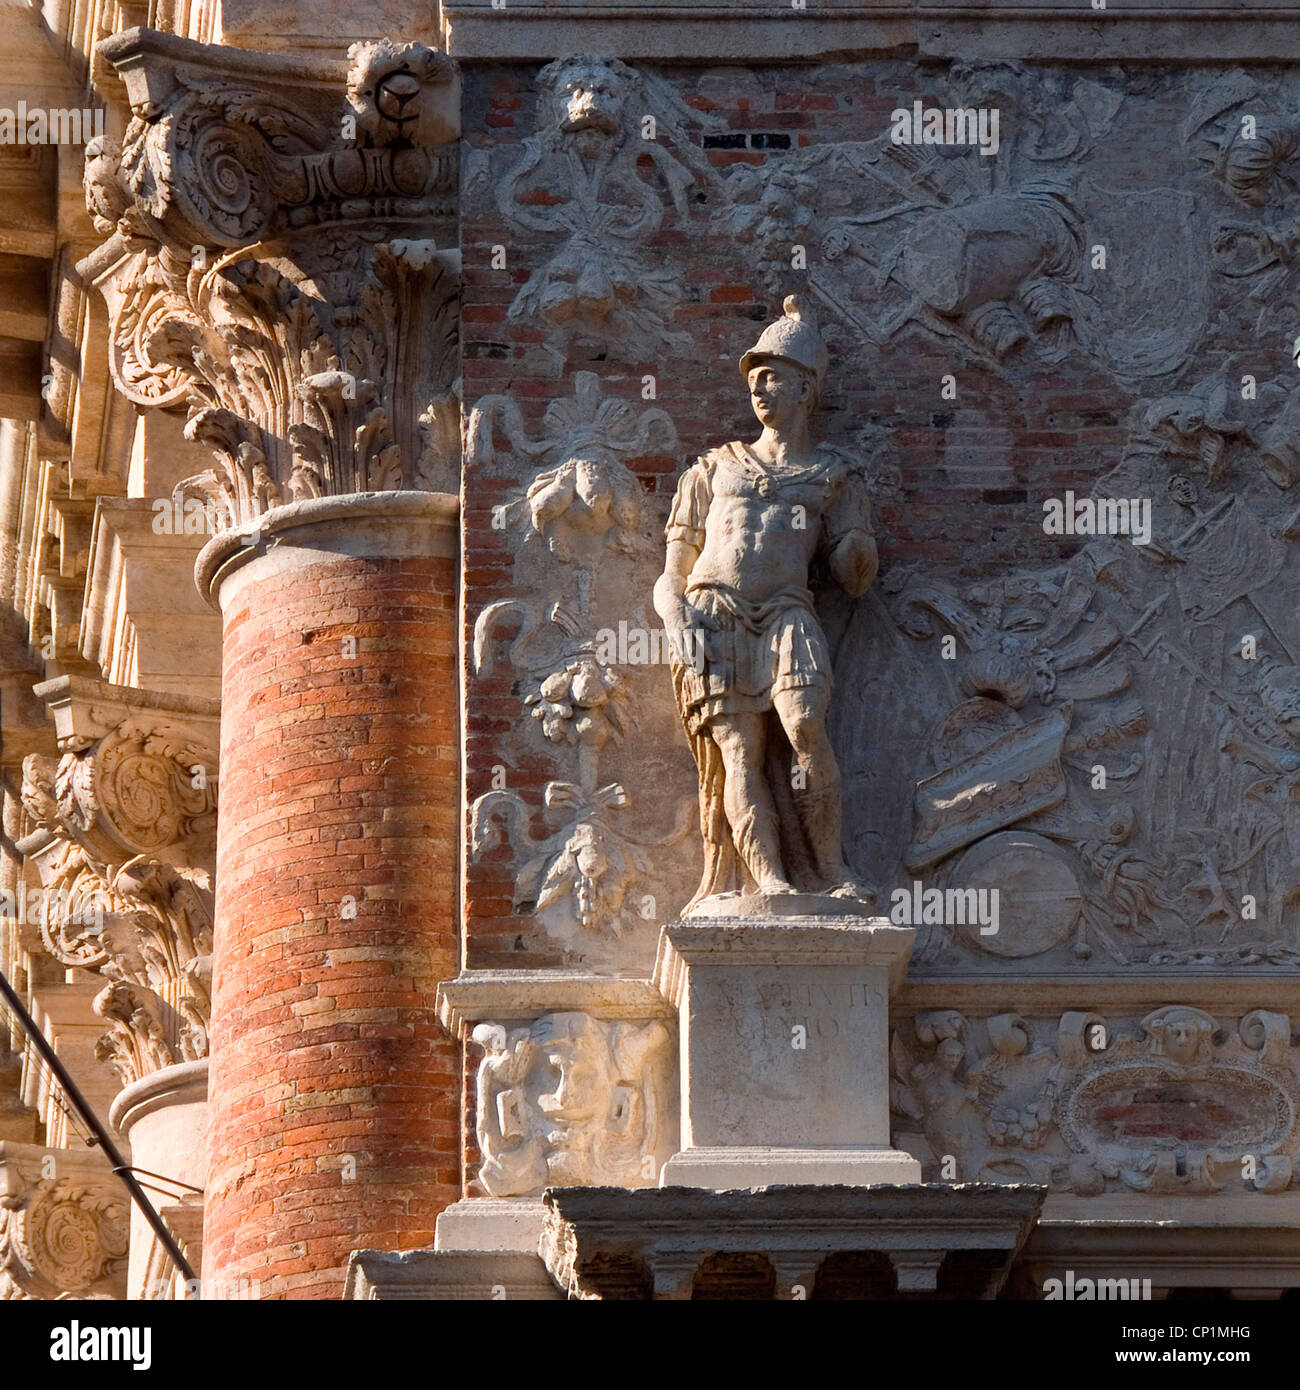 Military statue with fresco and pillar in Venice, Italy. Stock Photo